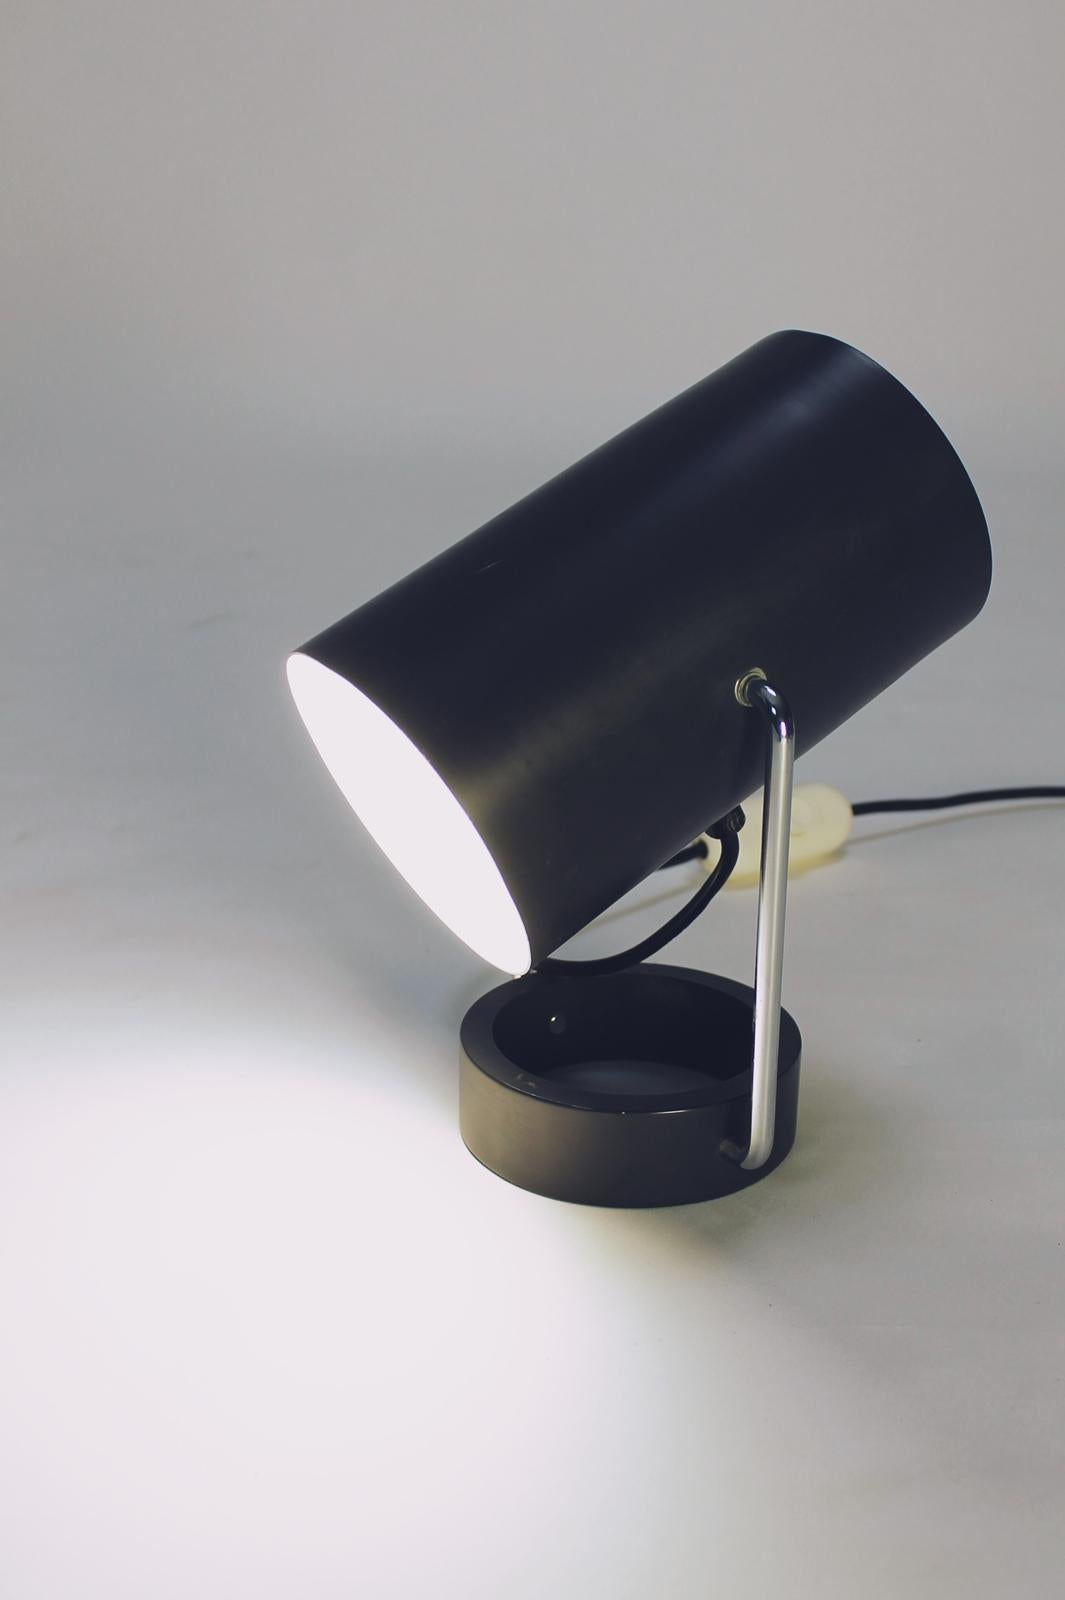 Pair of Tubus Table Lamps by Tulux in Style of Baltensweiler Swiss, 1960s For Sale 2